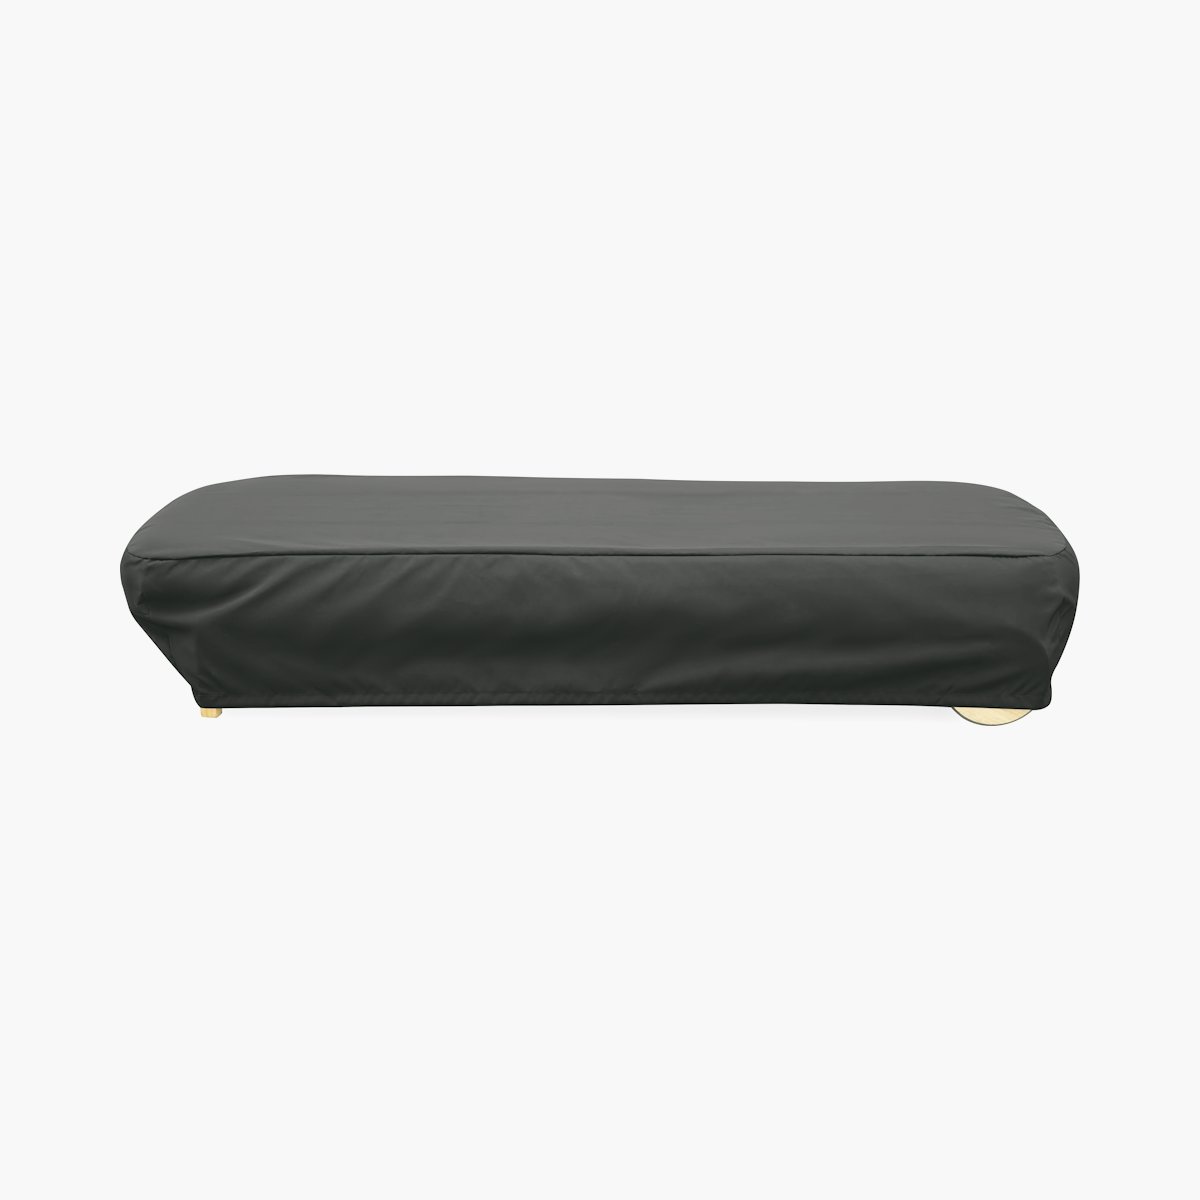 Softlands Outdoor Adjustable Chaise Lounge Cover